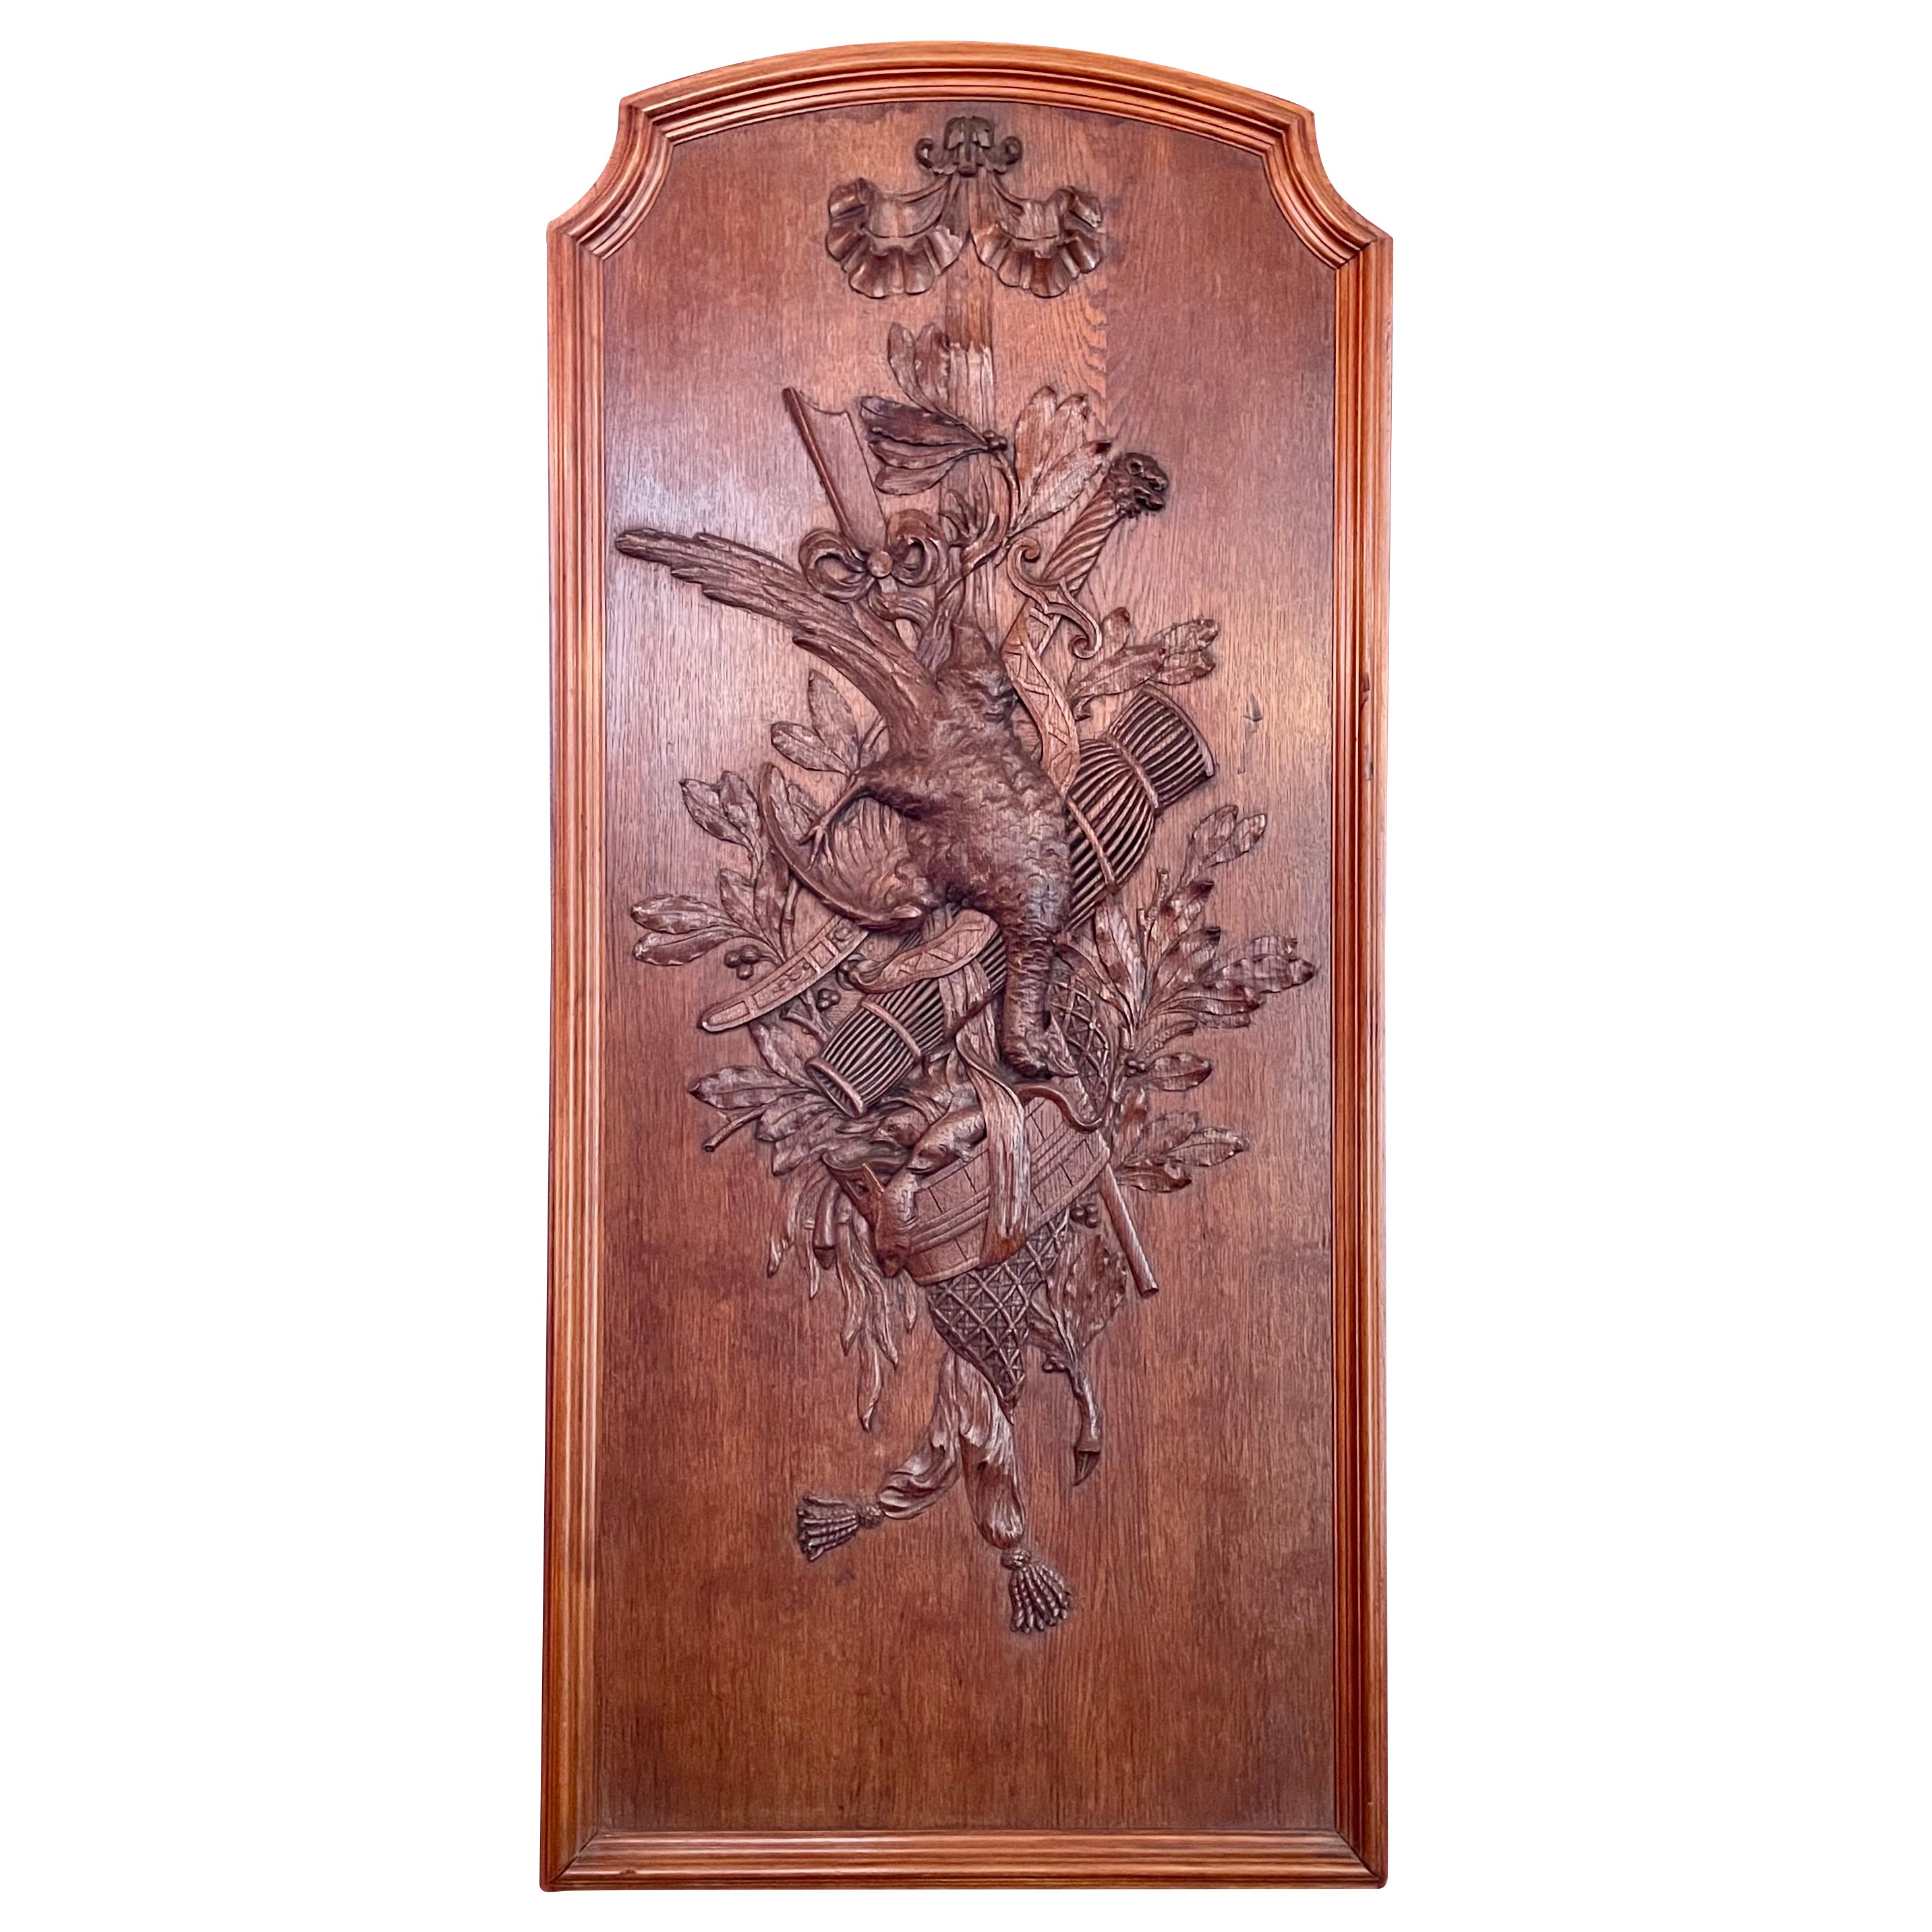 Antique French Carved Walnut "Nature Morte" Panel, Circa 1870-1880.